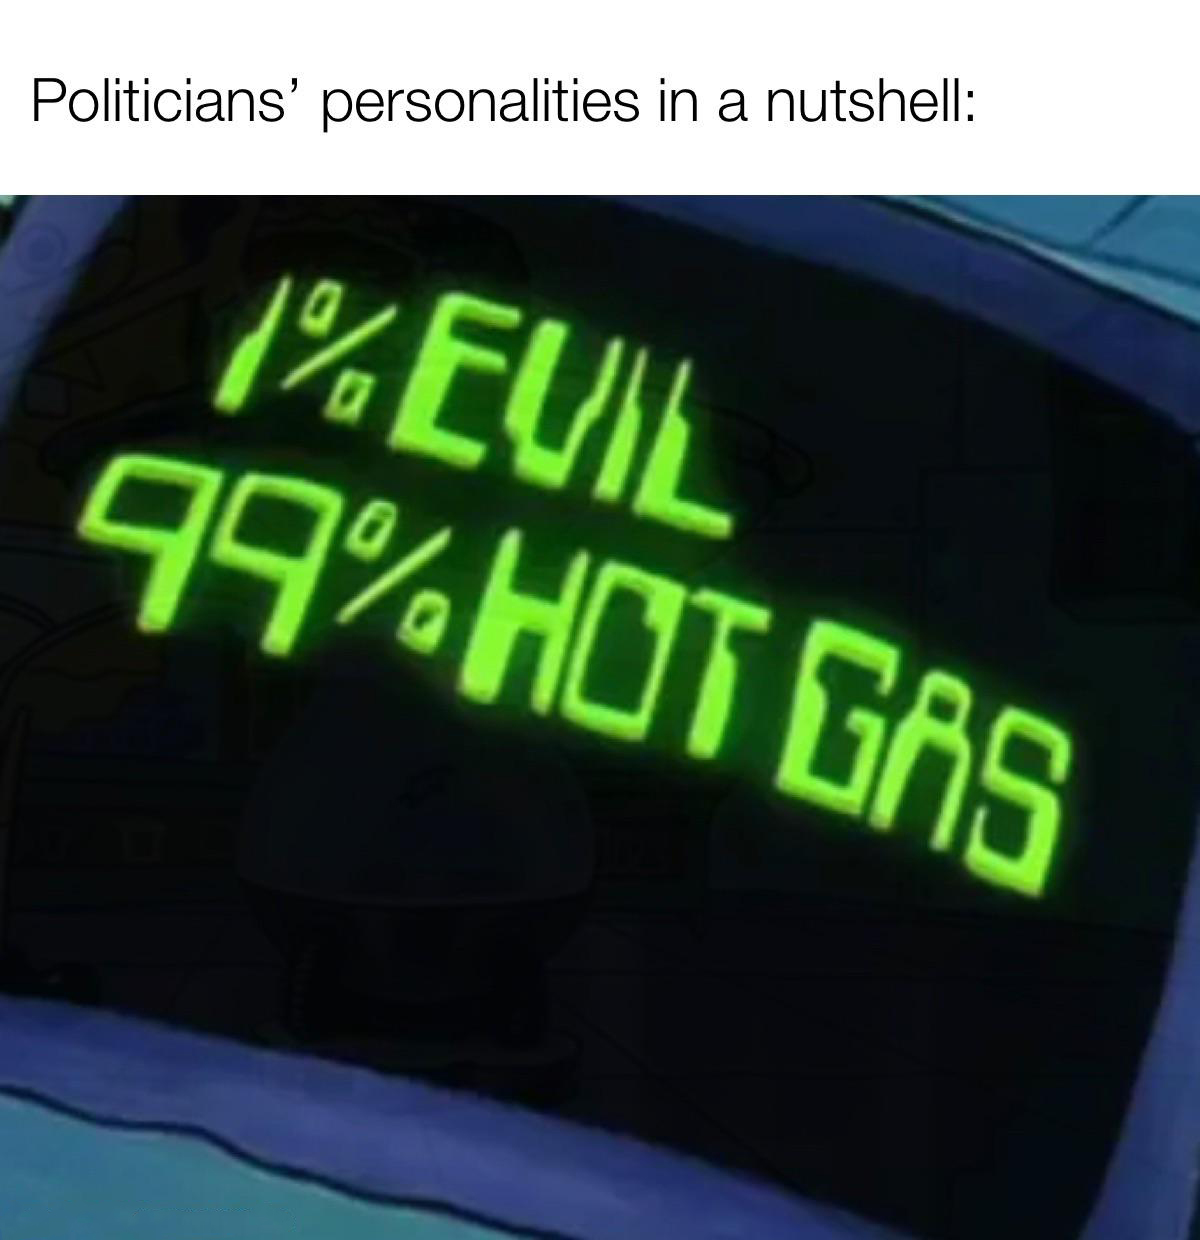 dank memes - signage - Politicians' personalities in a nutshell 1%Euil 99% Hot Gas